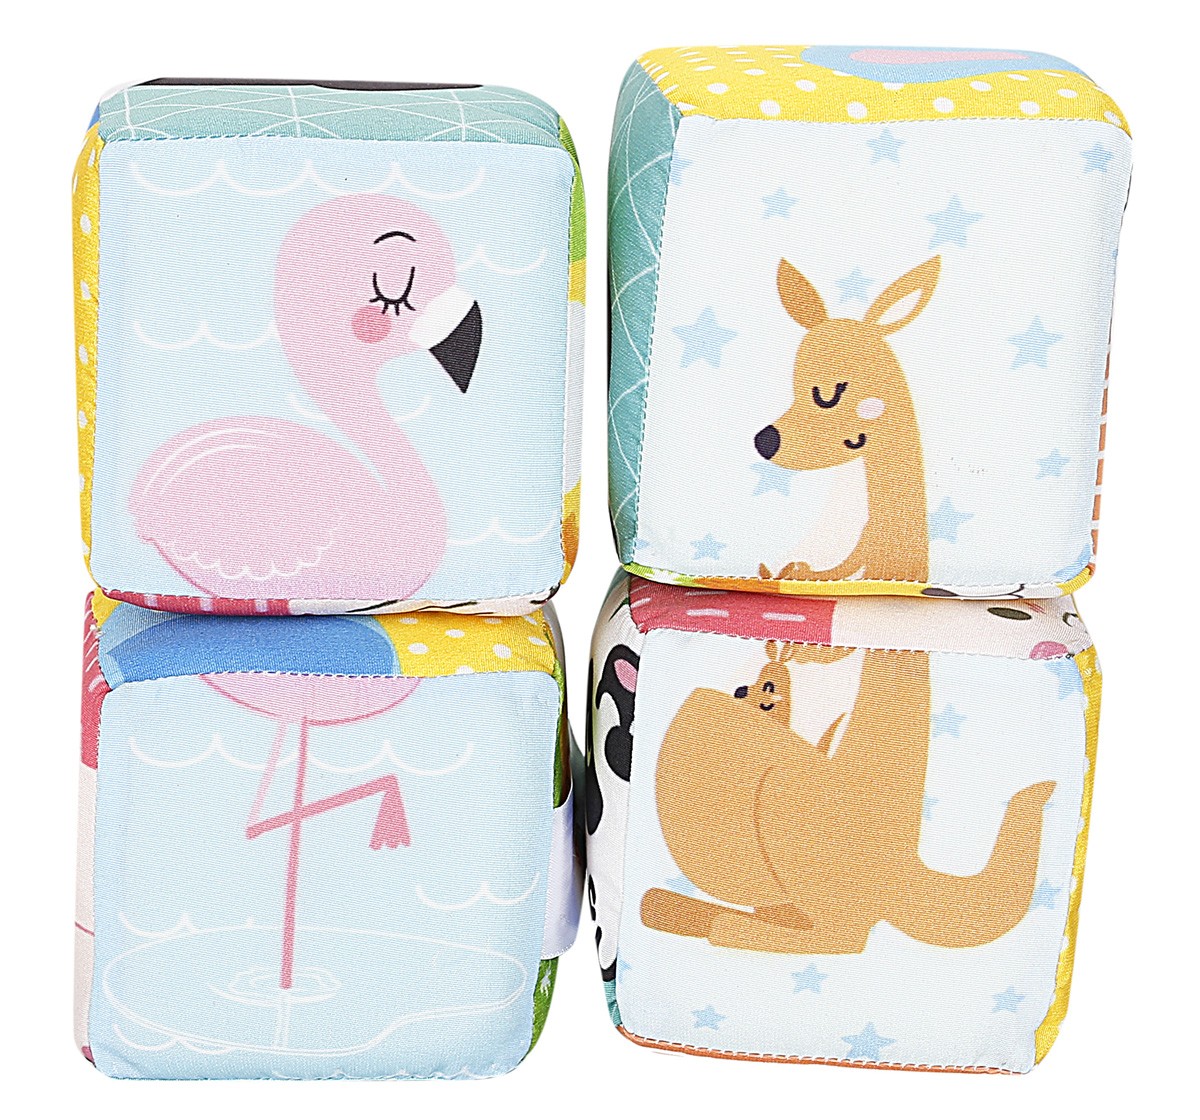 Shooting Star Animals Cube Blocks for kids 3Y+, Multicolour